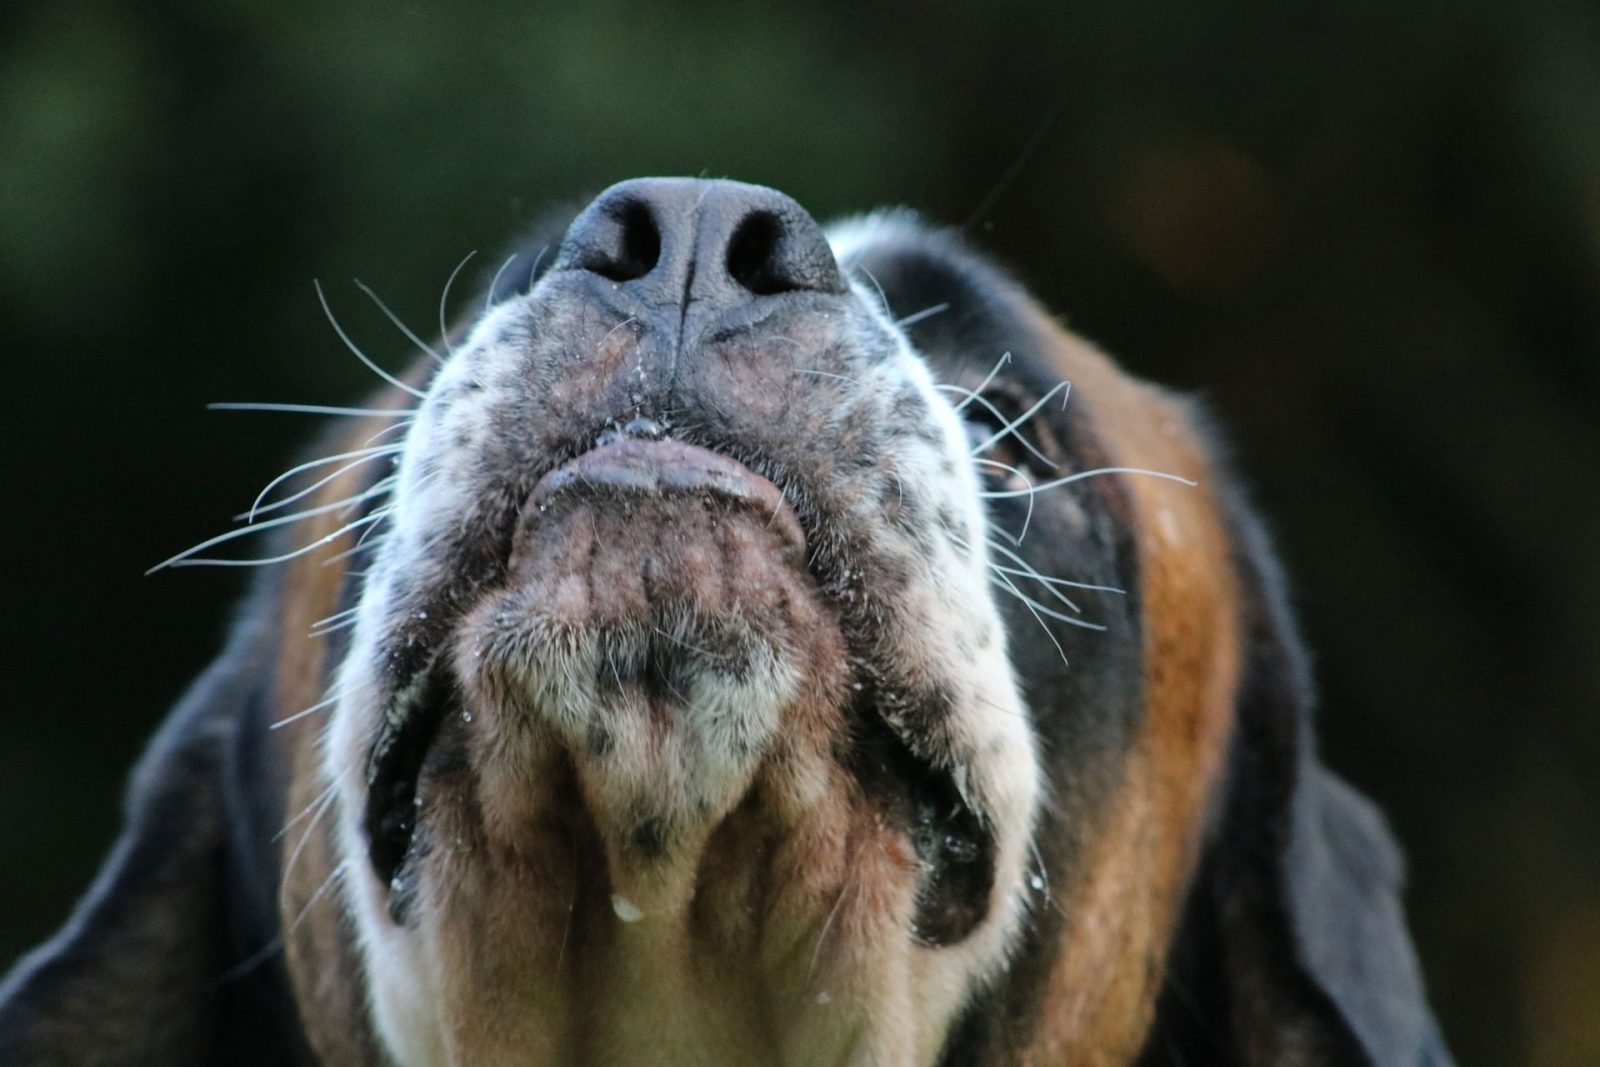 Can I Give My Dog Mouthwash? Here's Why You Shouldn't